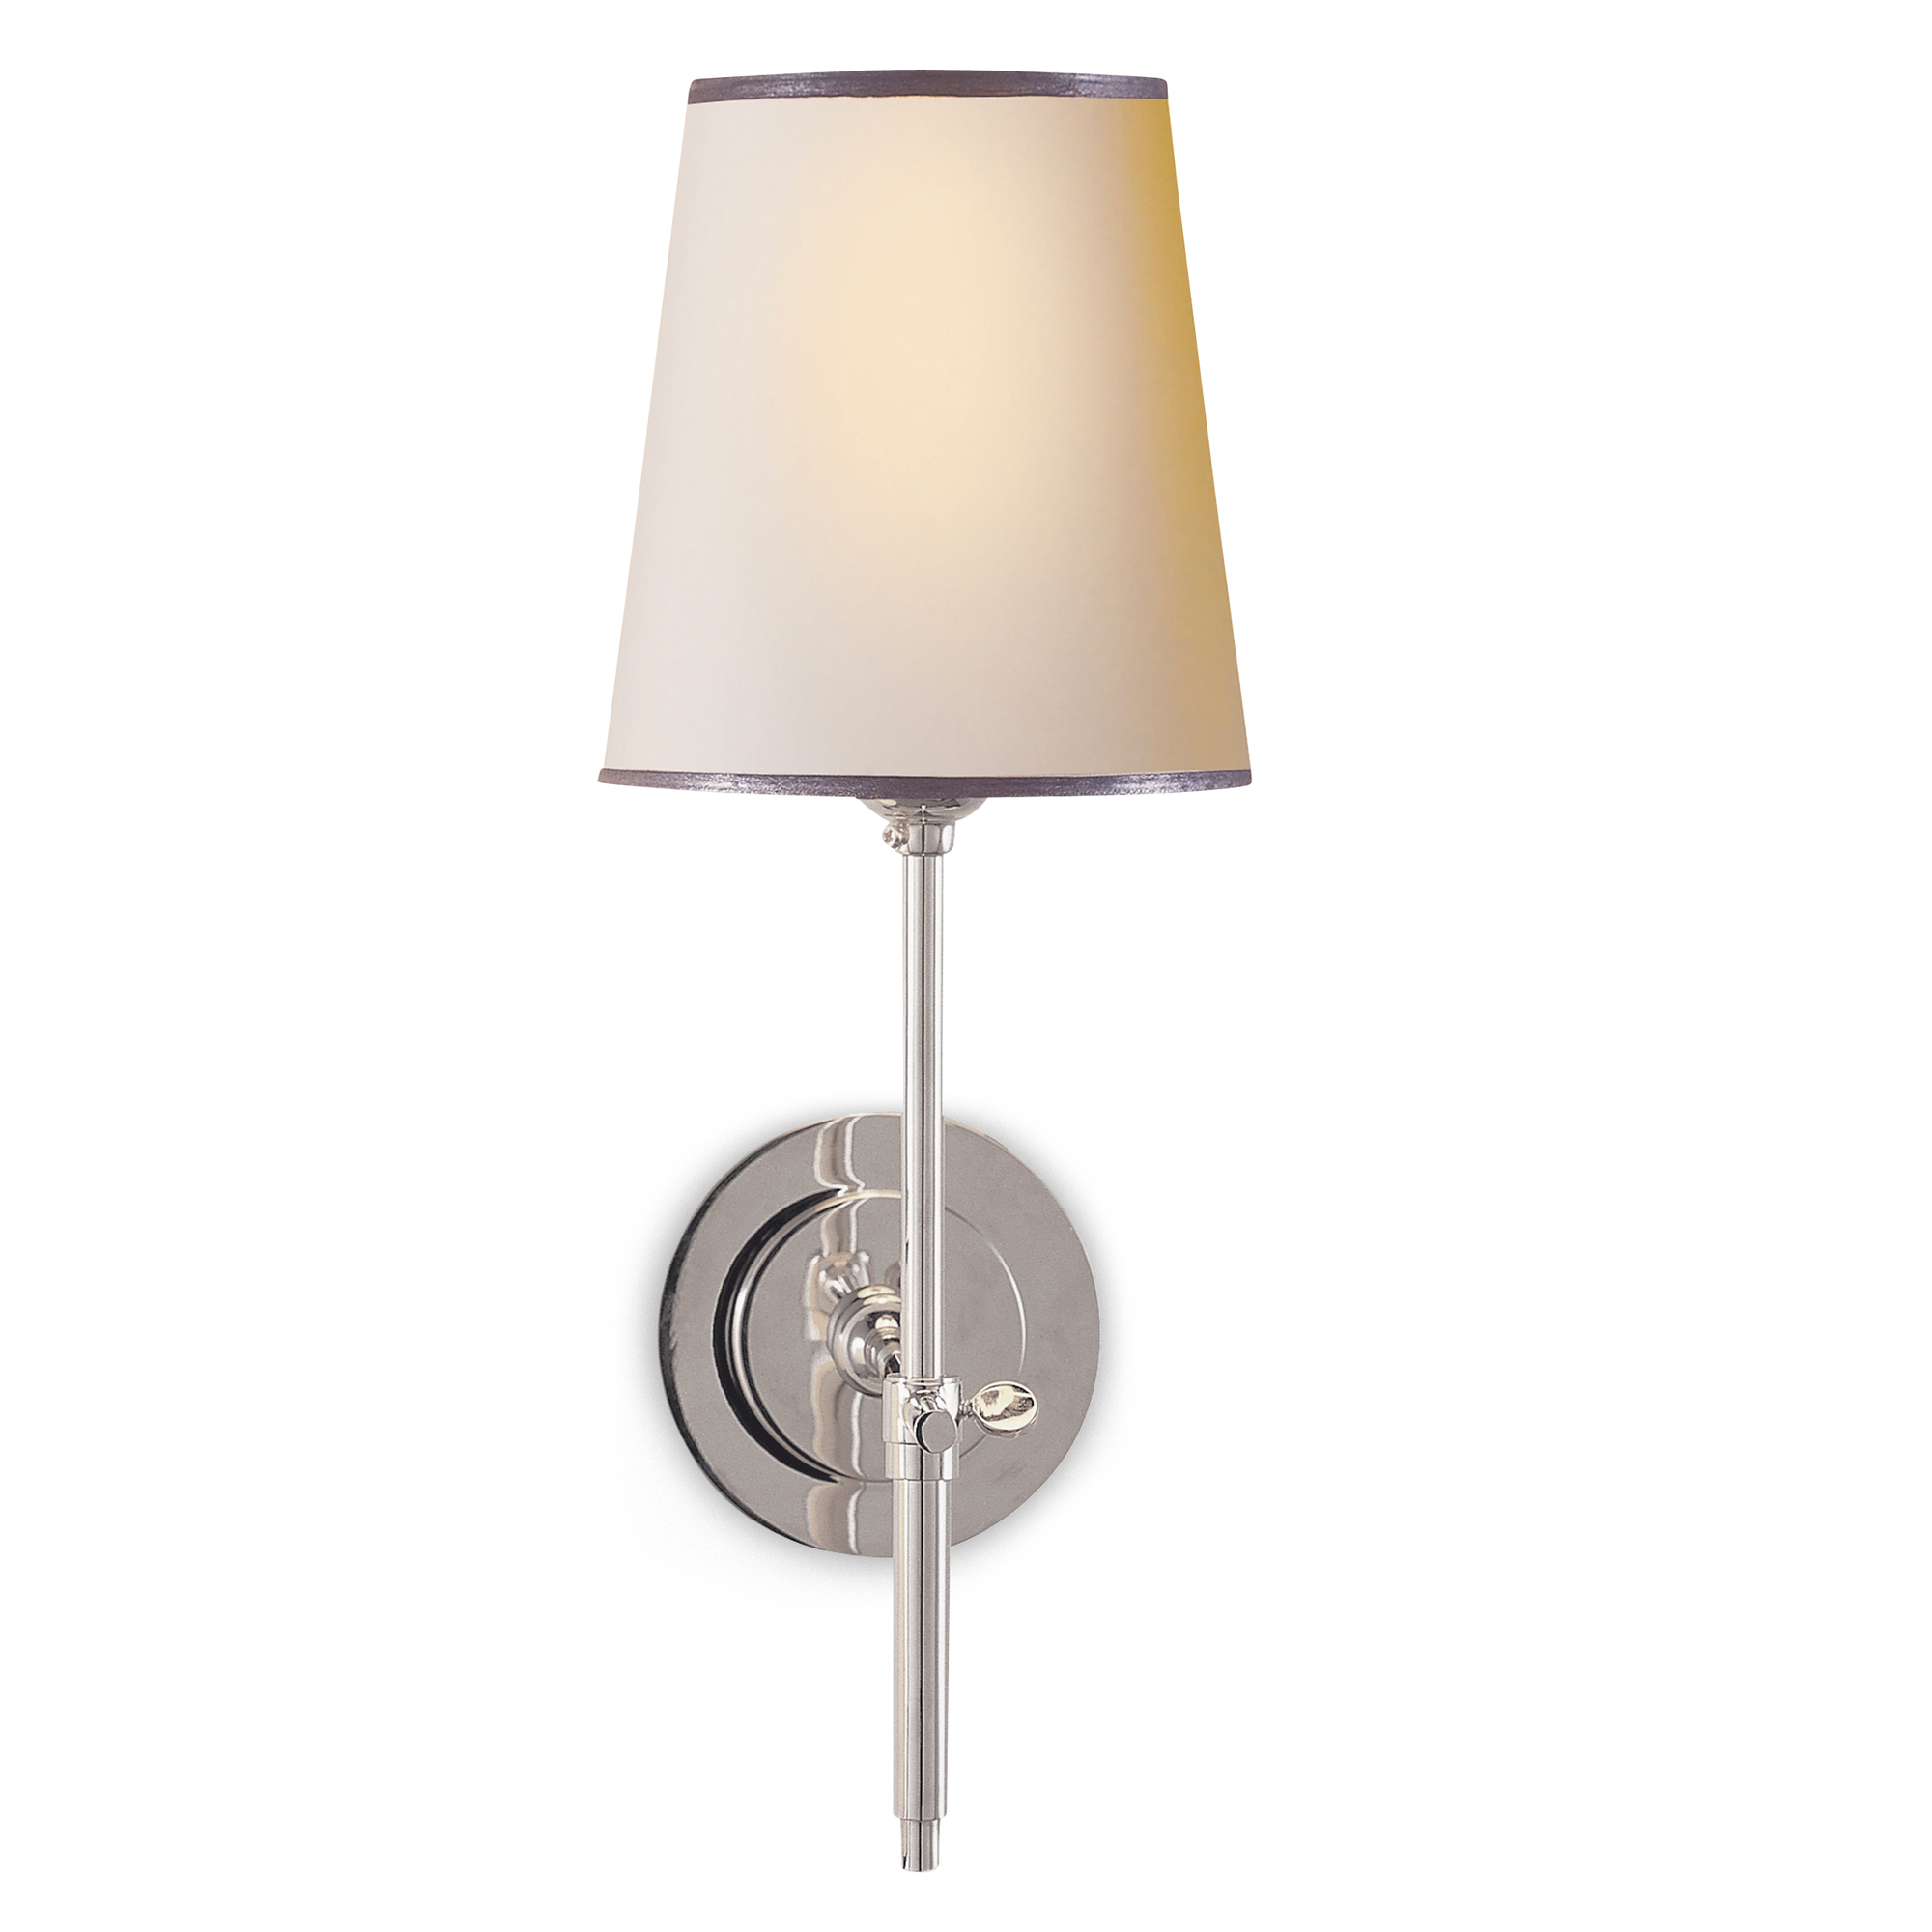 Polished nickel sconce with a natural paper shade trimmed in silver tape.